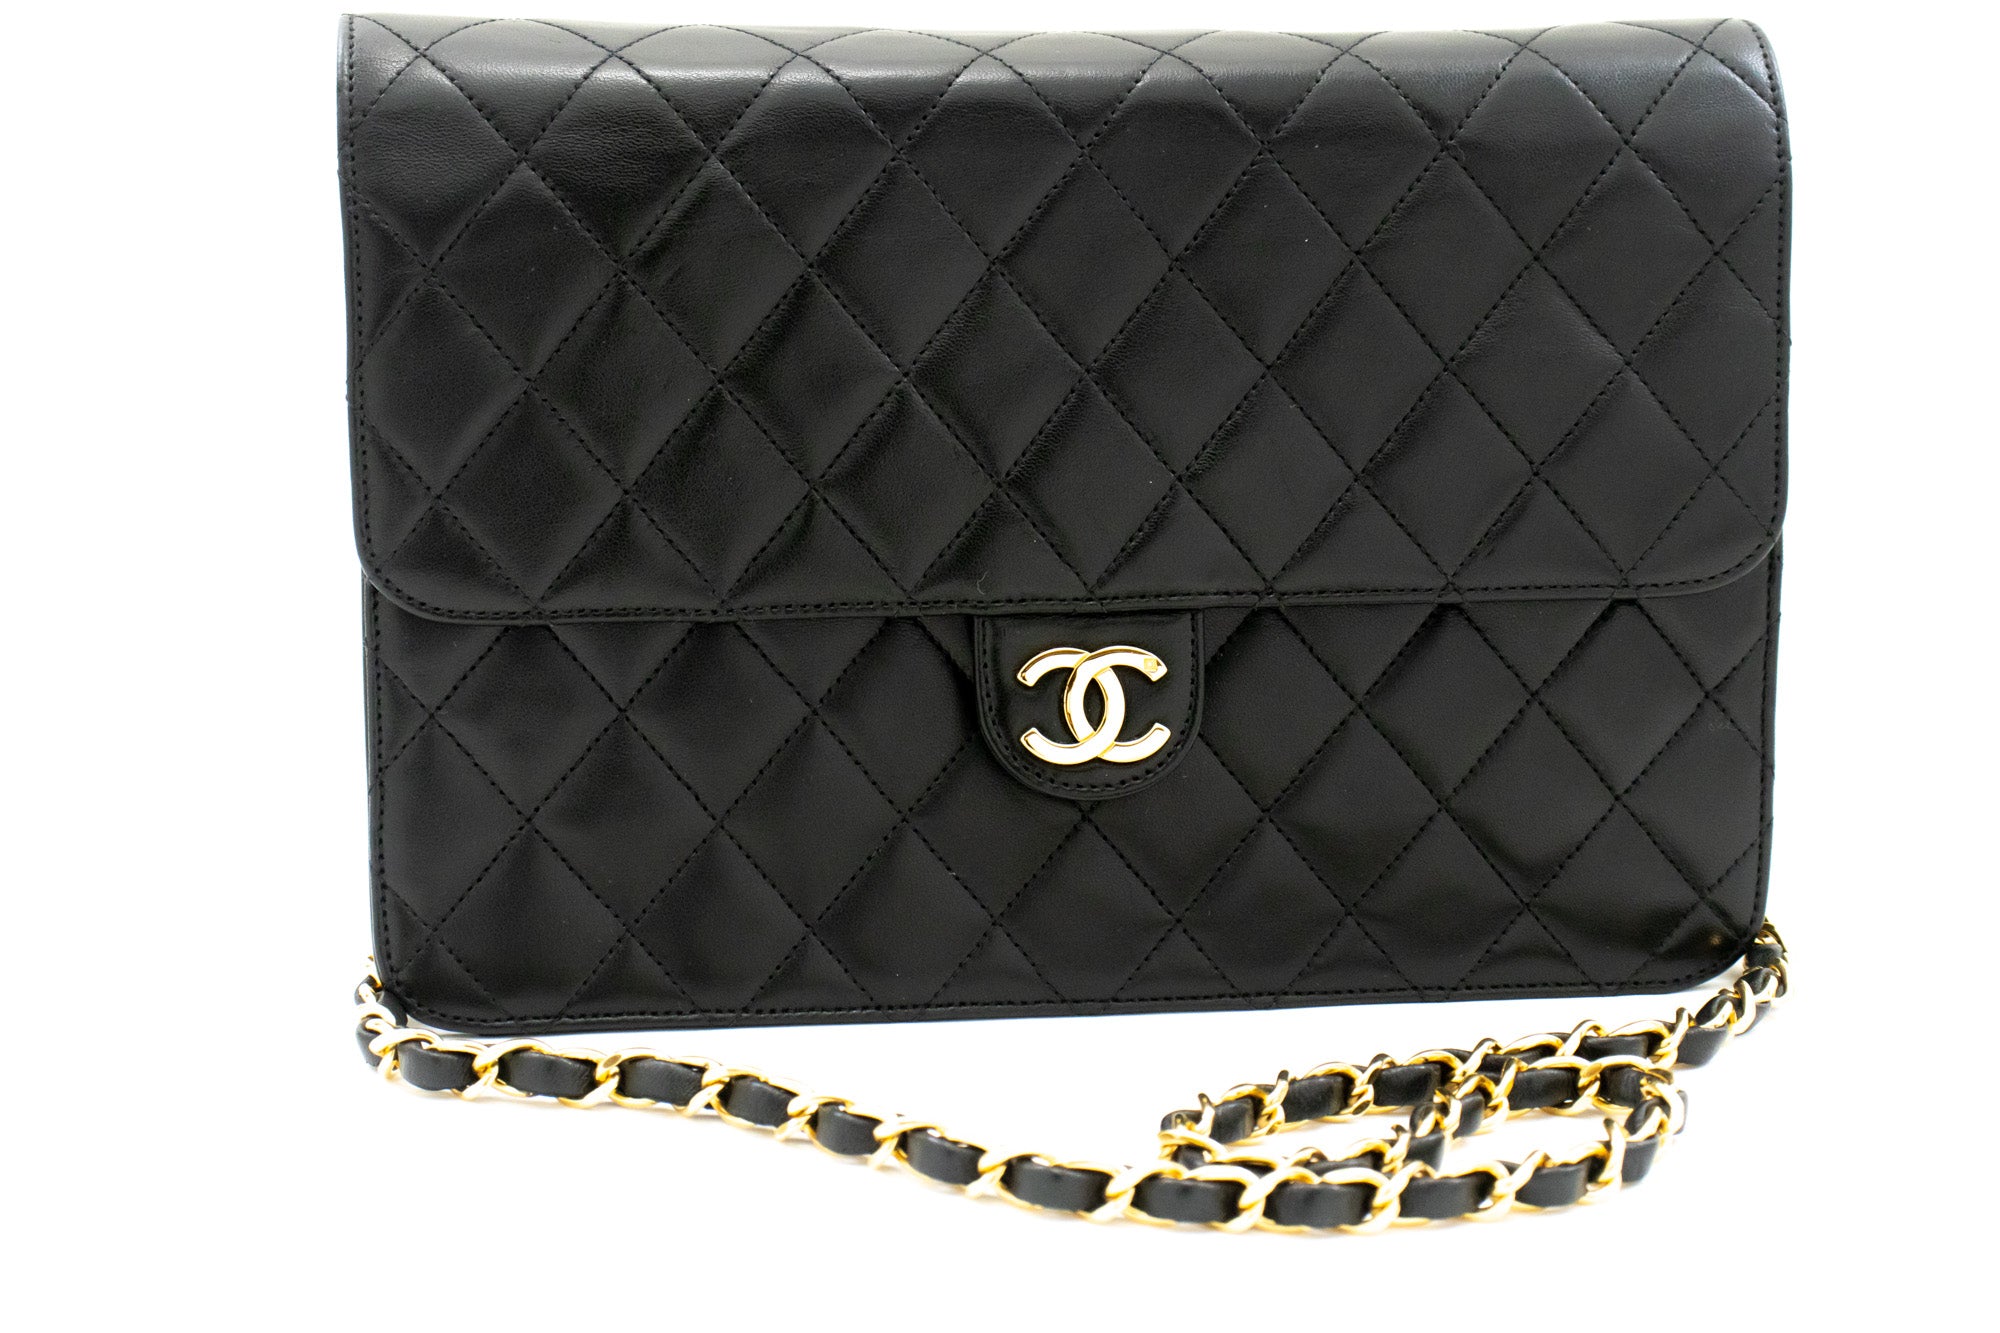 Chanel Chain Shoulder Bag Clutch Black Quilted Flap Lambskin Purse L23